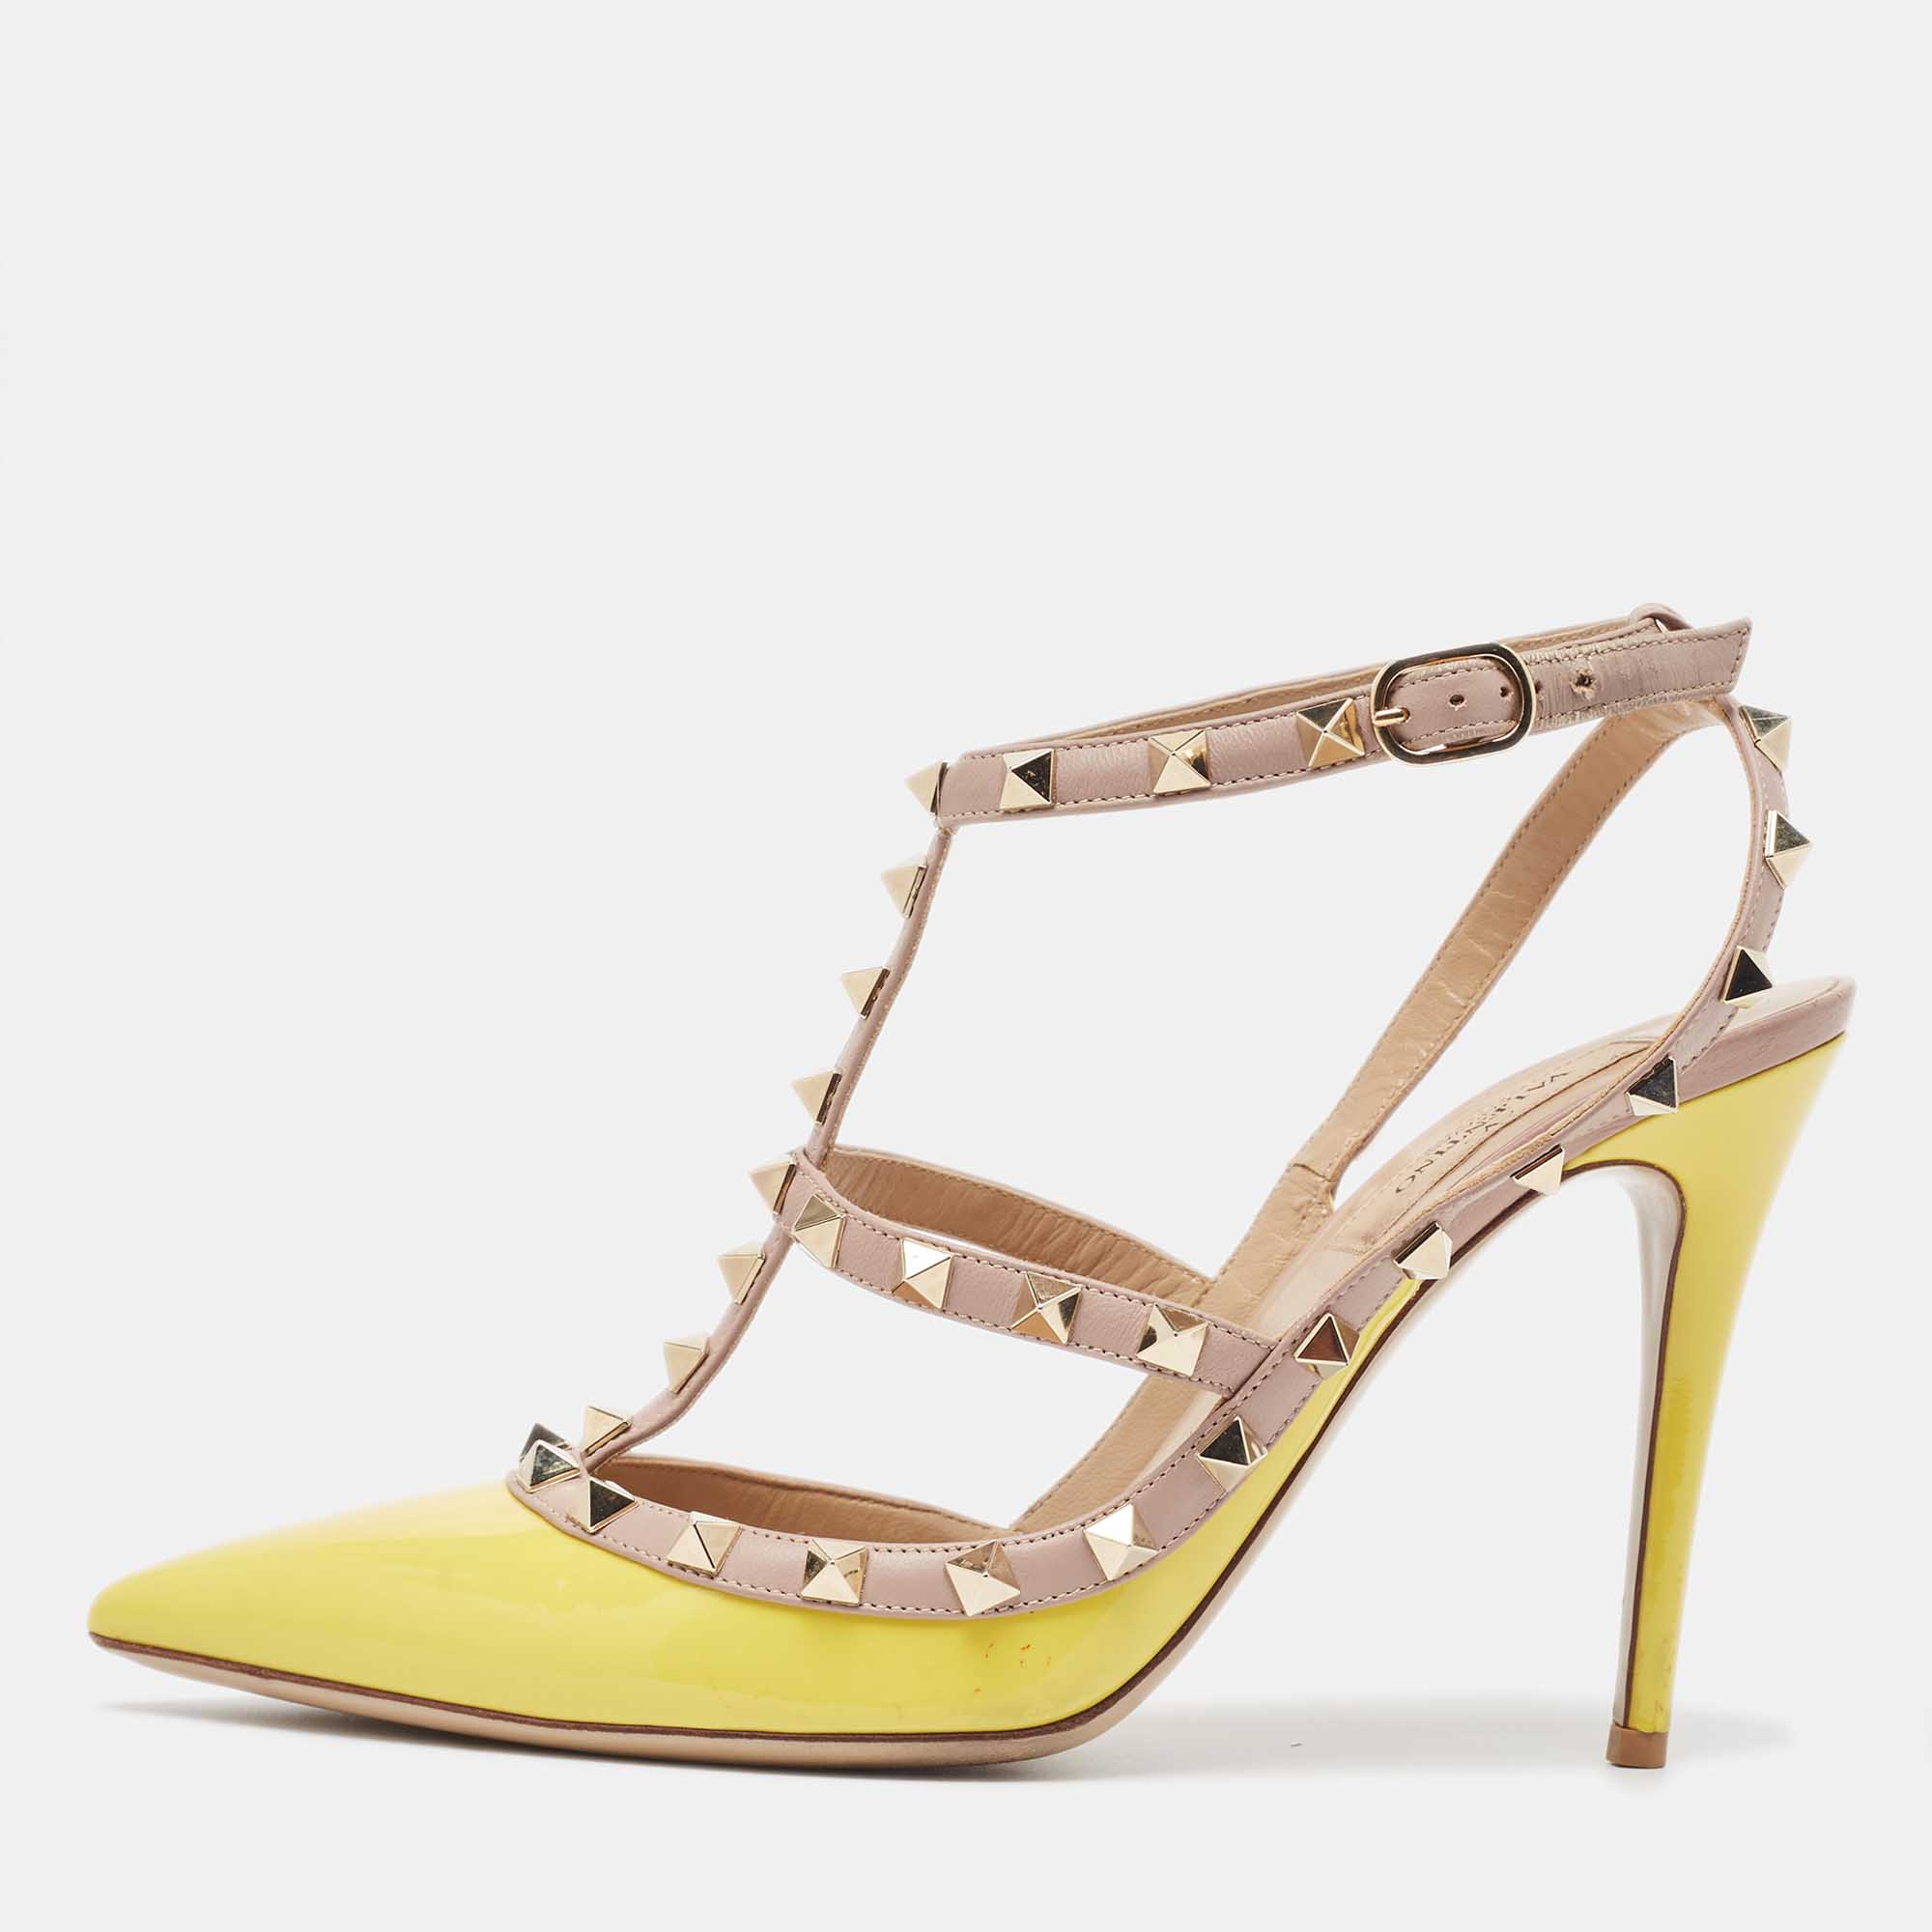 Pre-owned Valentino Garavani Yellow/pink Leather Rockstud Ankle Strap Pumps Size 39.5